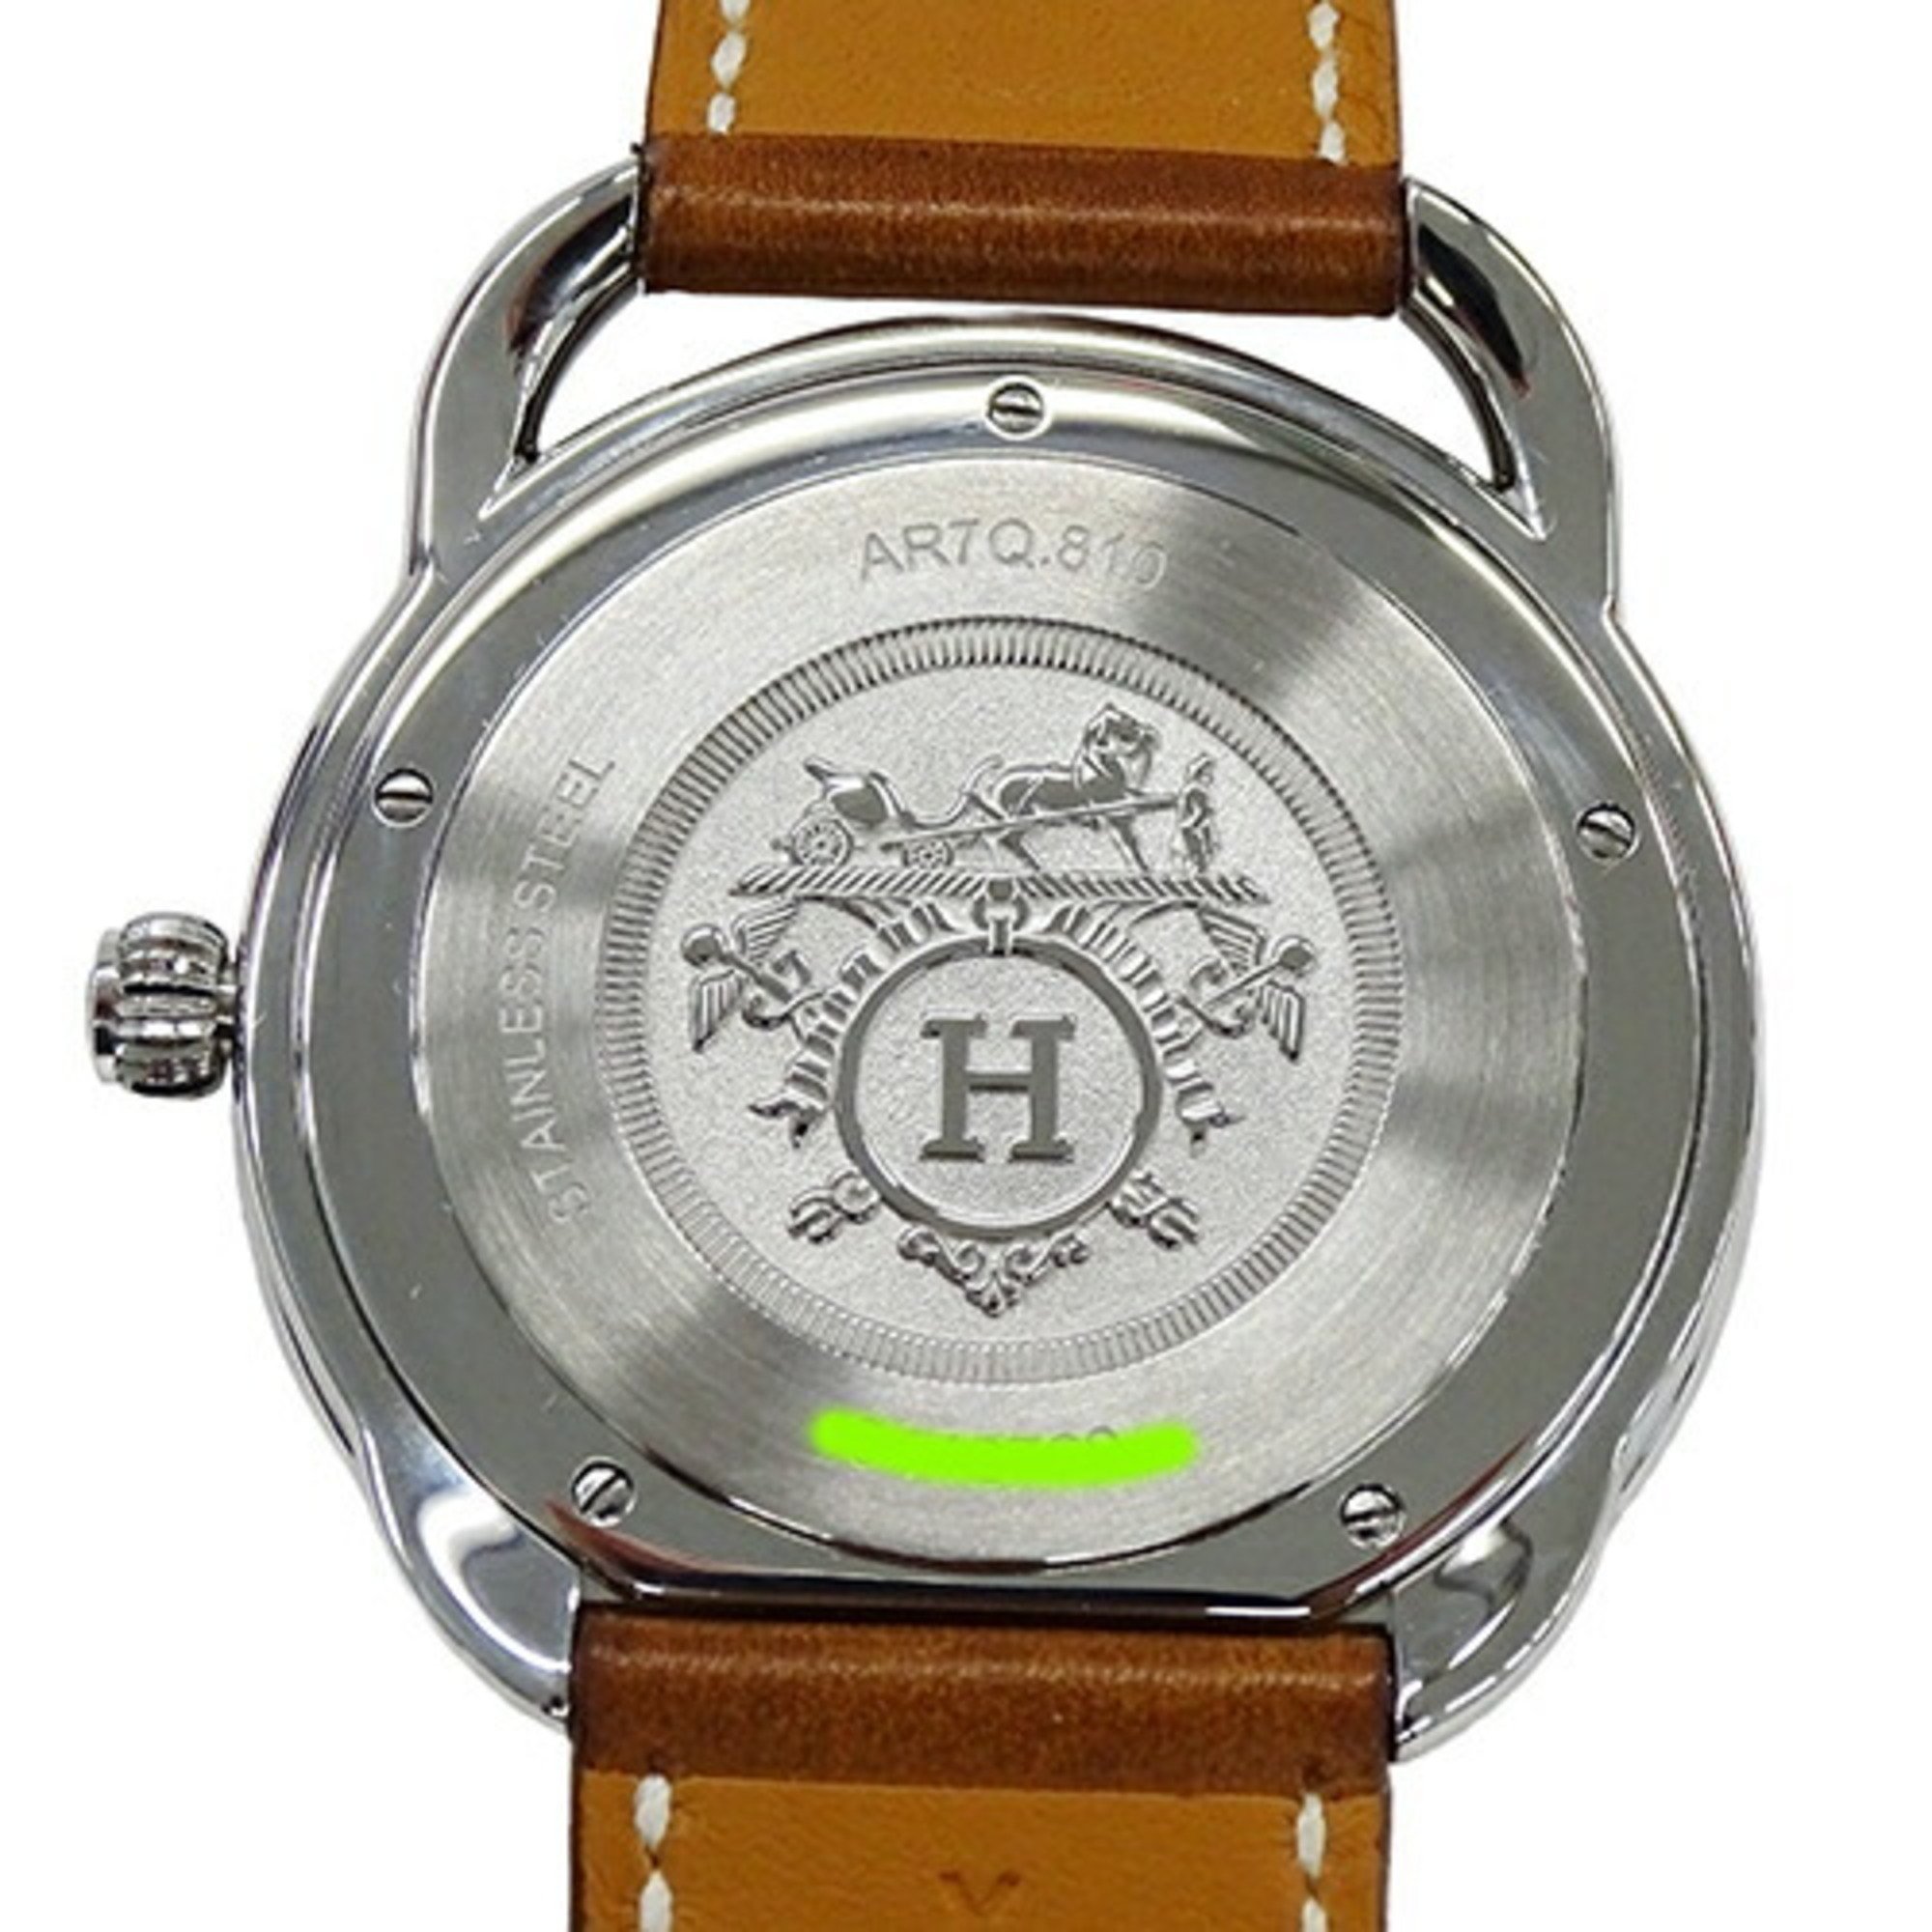 Hermes Watch Men's Brand Arceau GM Date Quartz QZ Stainless Steel SS Leather AR7Q810 Round Polished